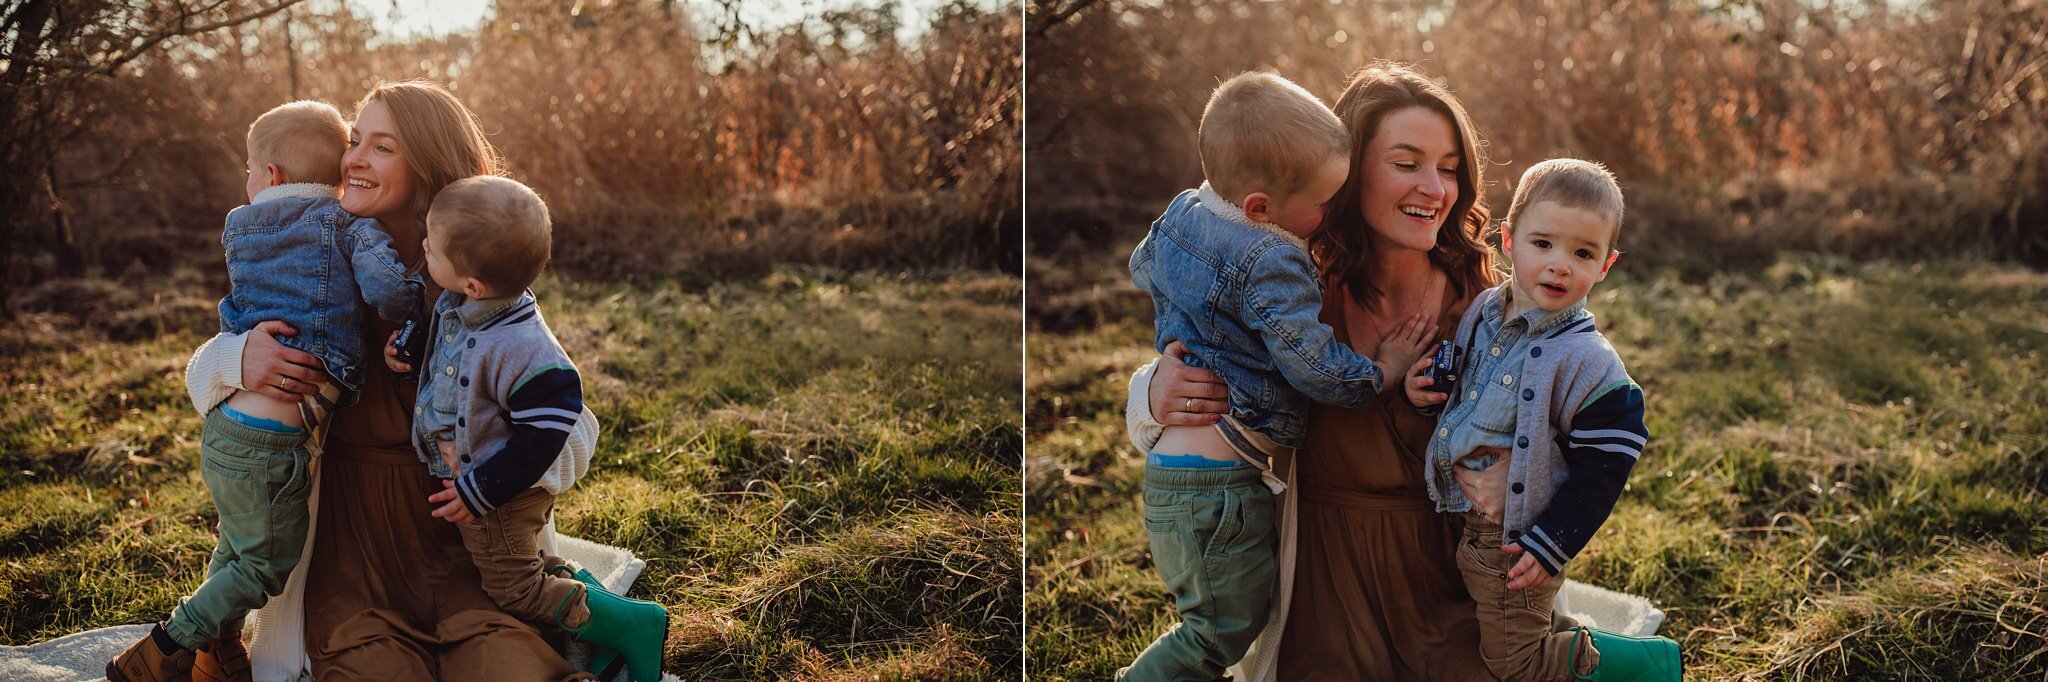 family photography on Whidbey Island